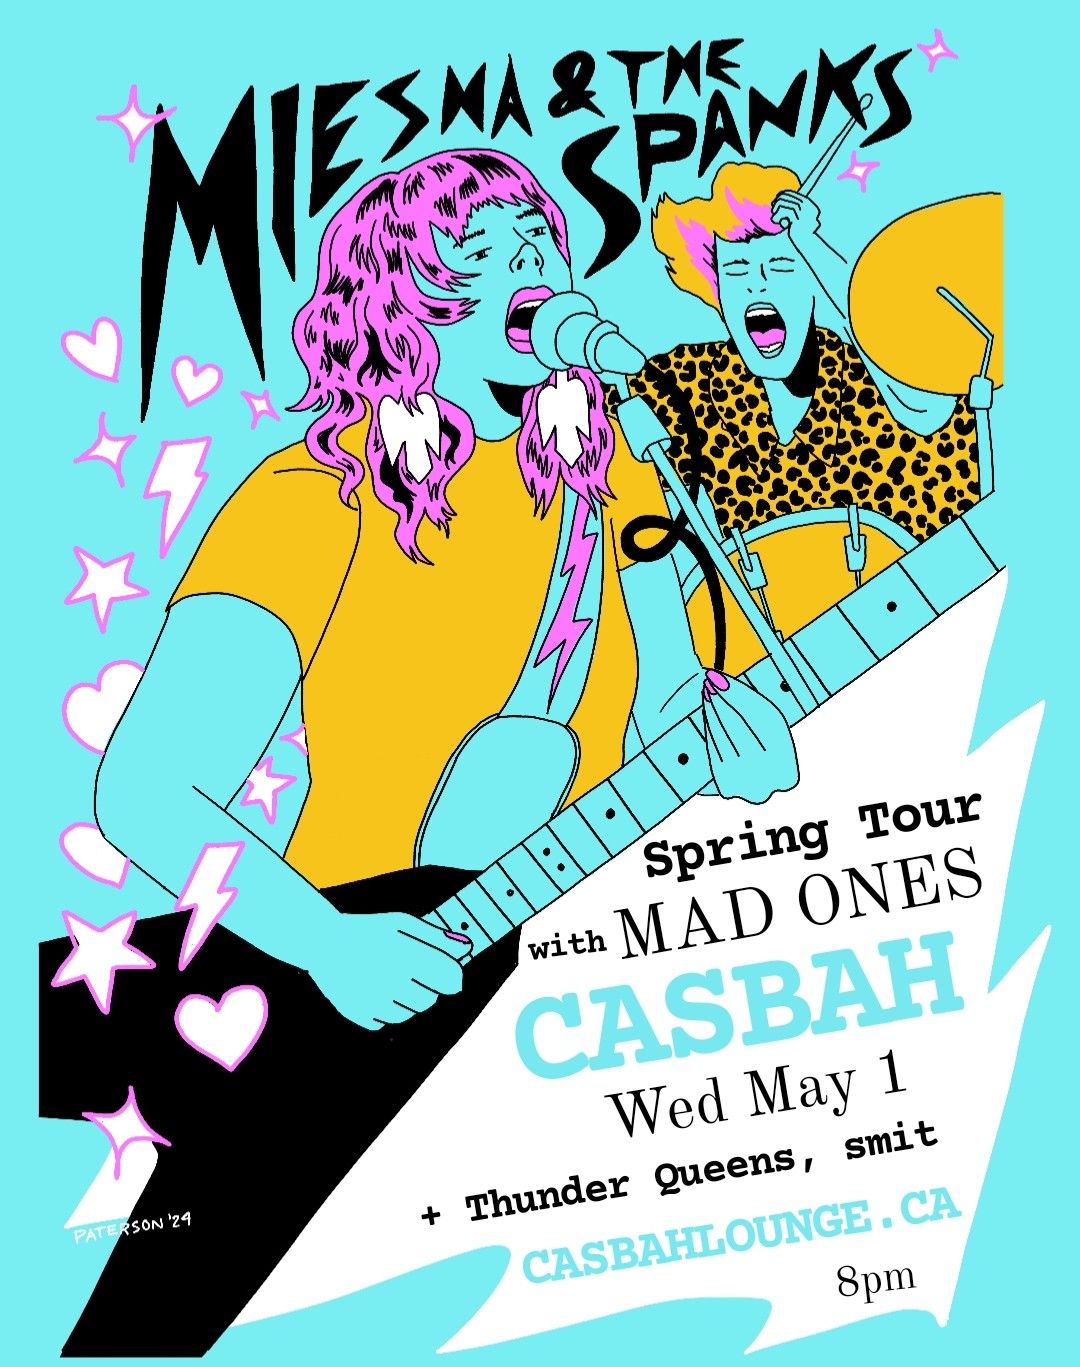 MEISHA & THE SPANKS (Mint Records), MAD ONES, Thunder Queens (Spring Tour Launch) @ CASBAH